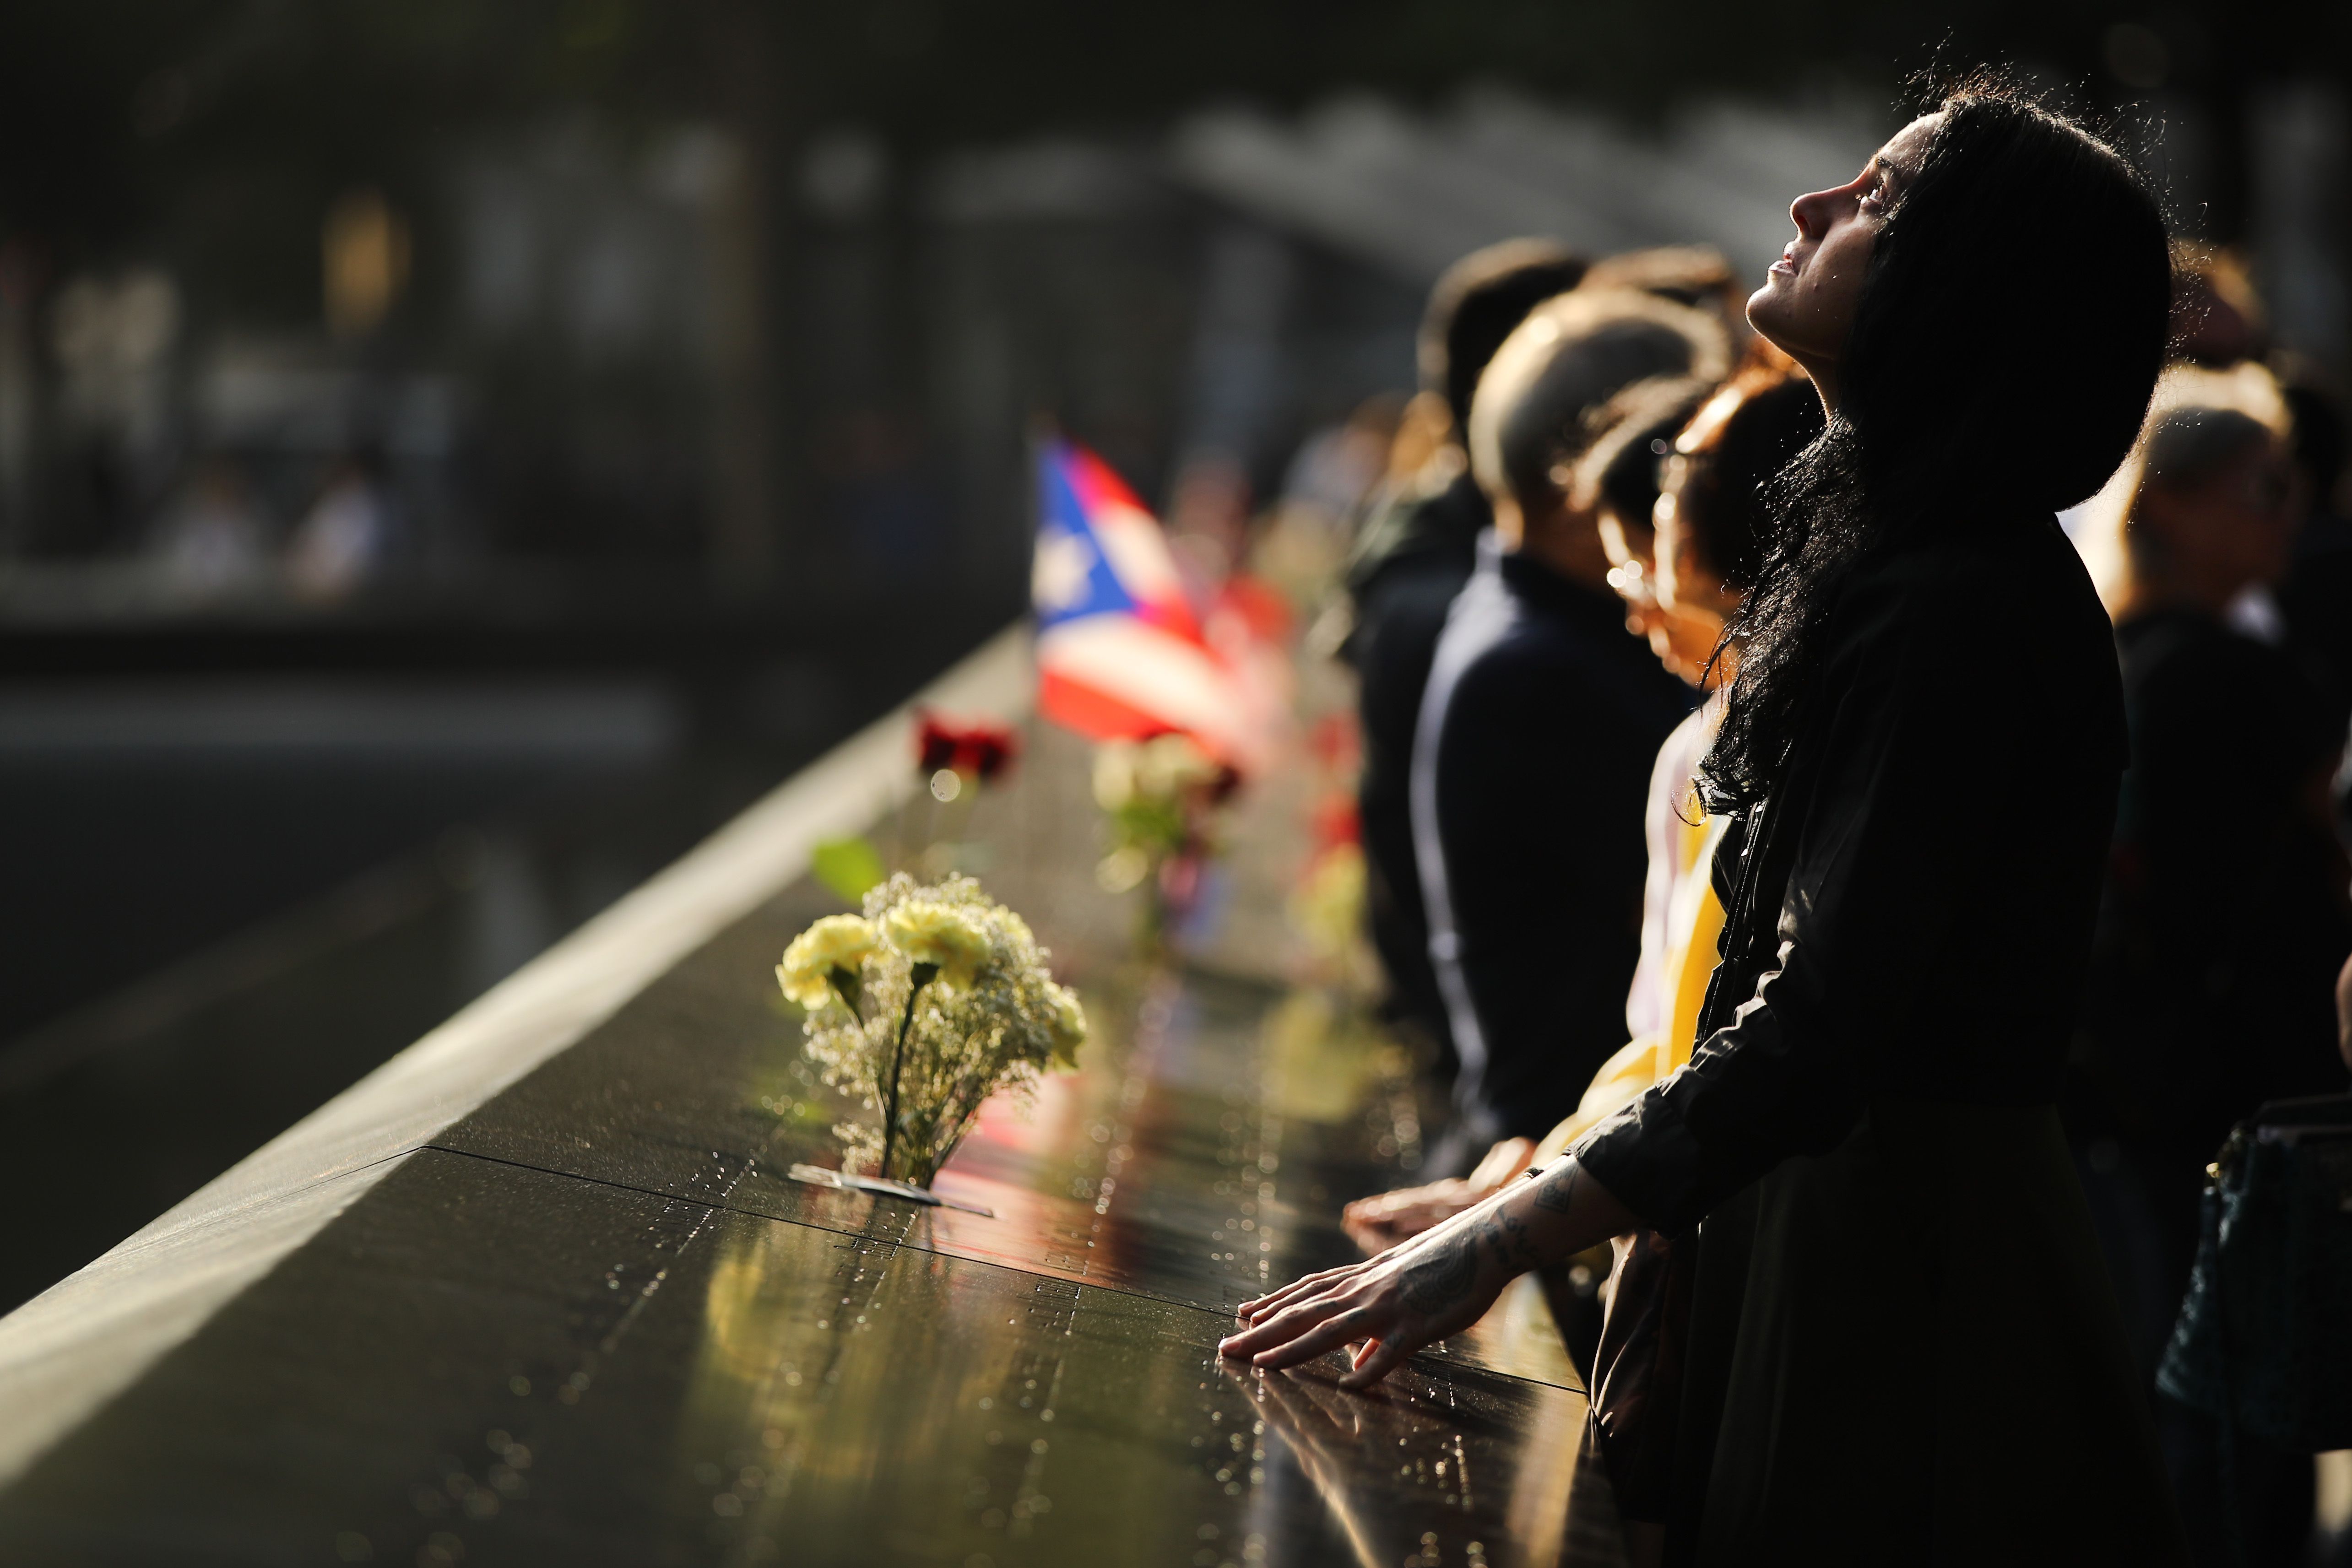 Alexandra Hamatie, whose cousin Robert Horohoe was killed on September 11, pauses at the National September 11 Memorial 